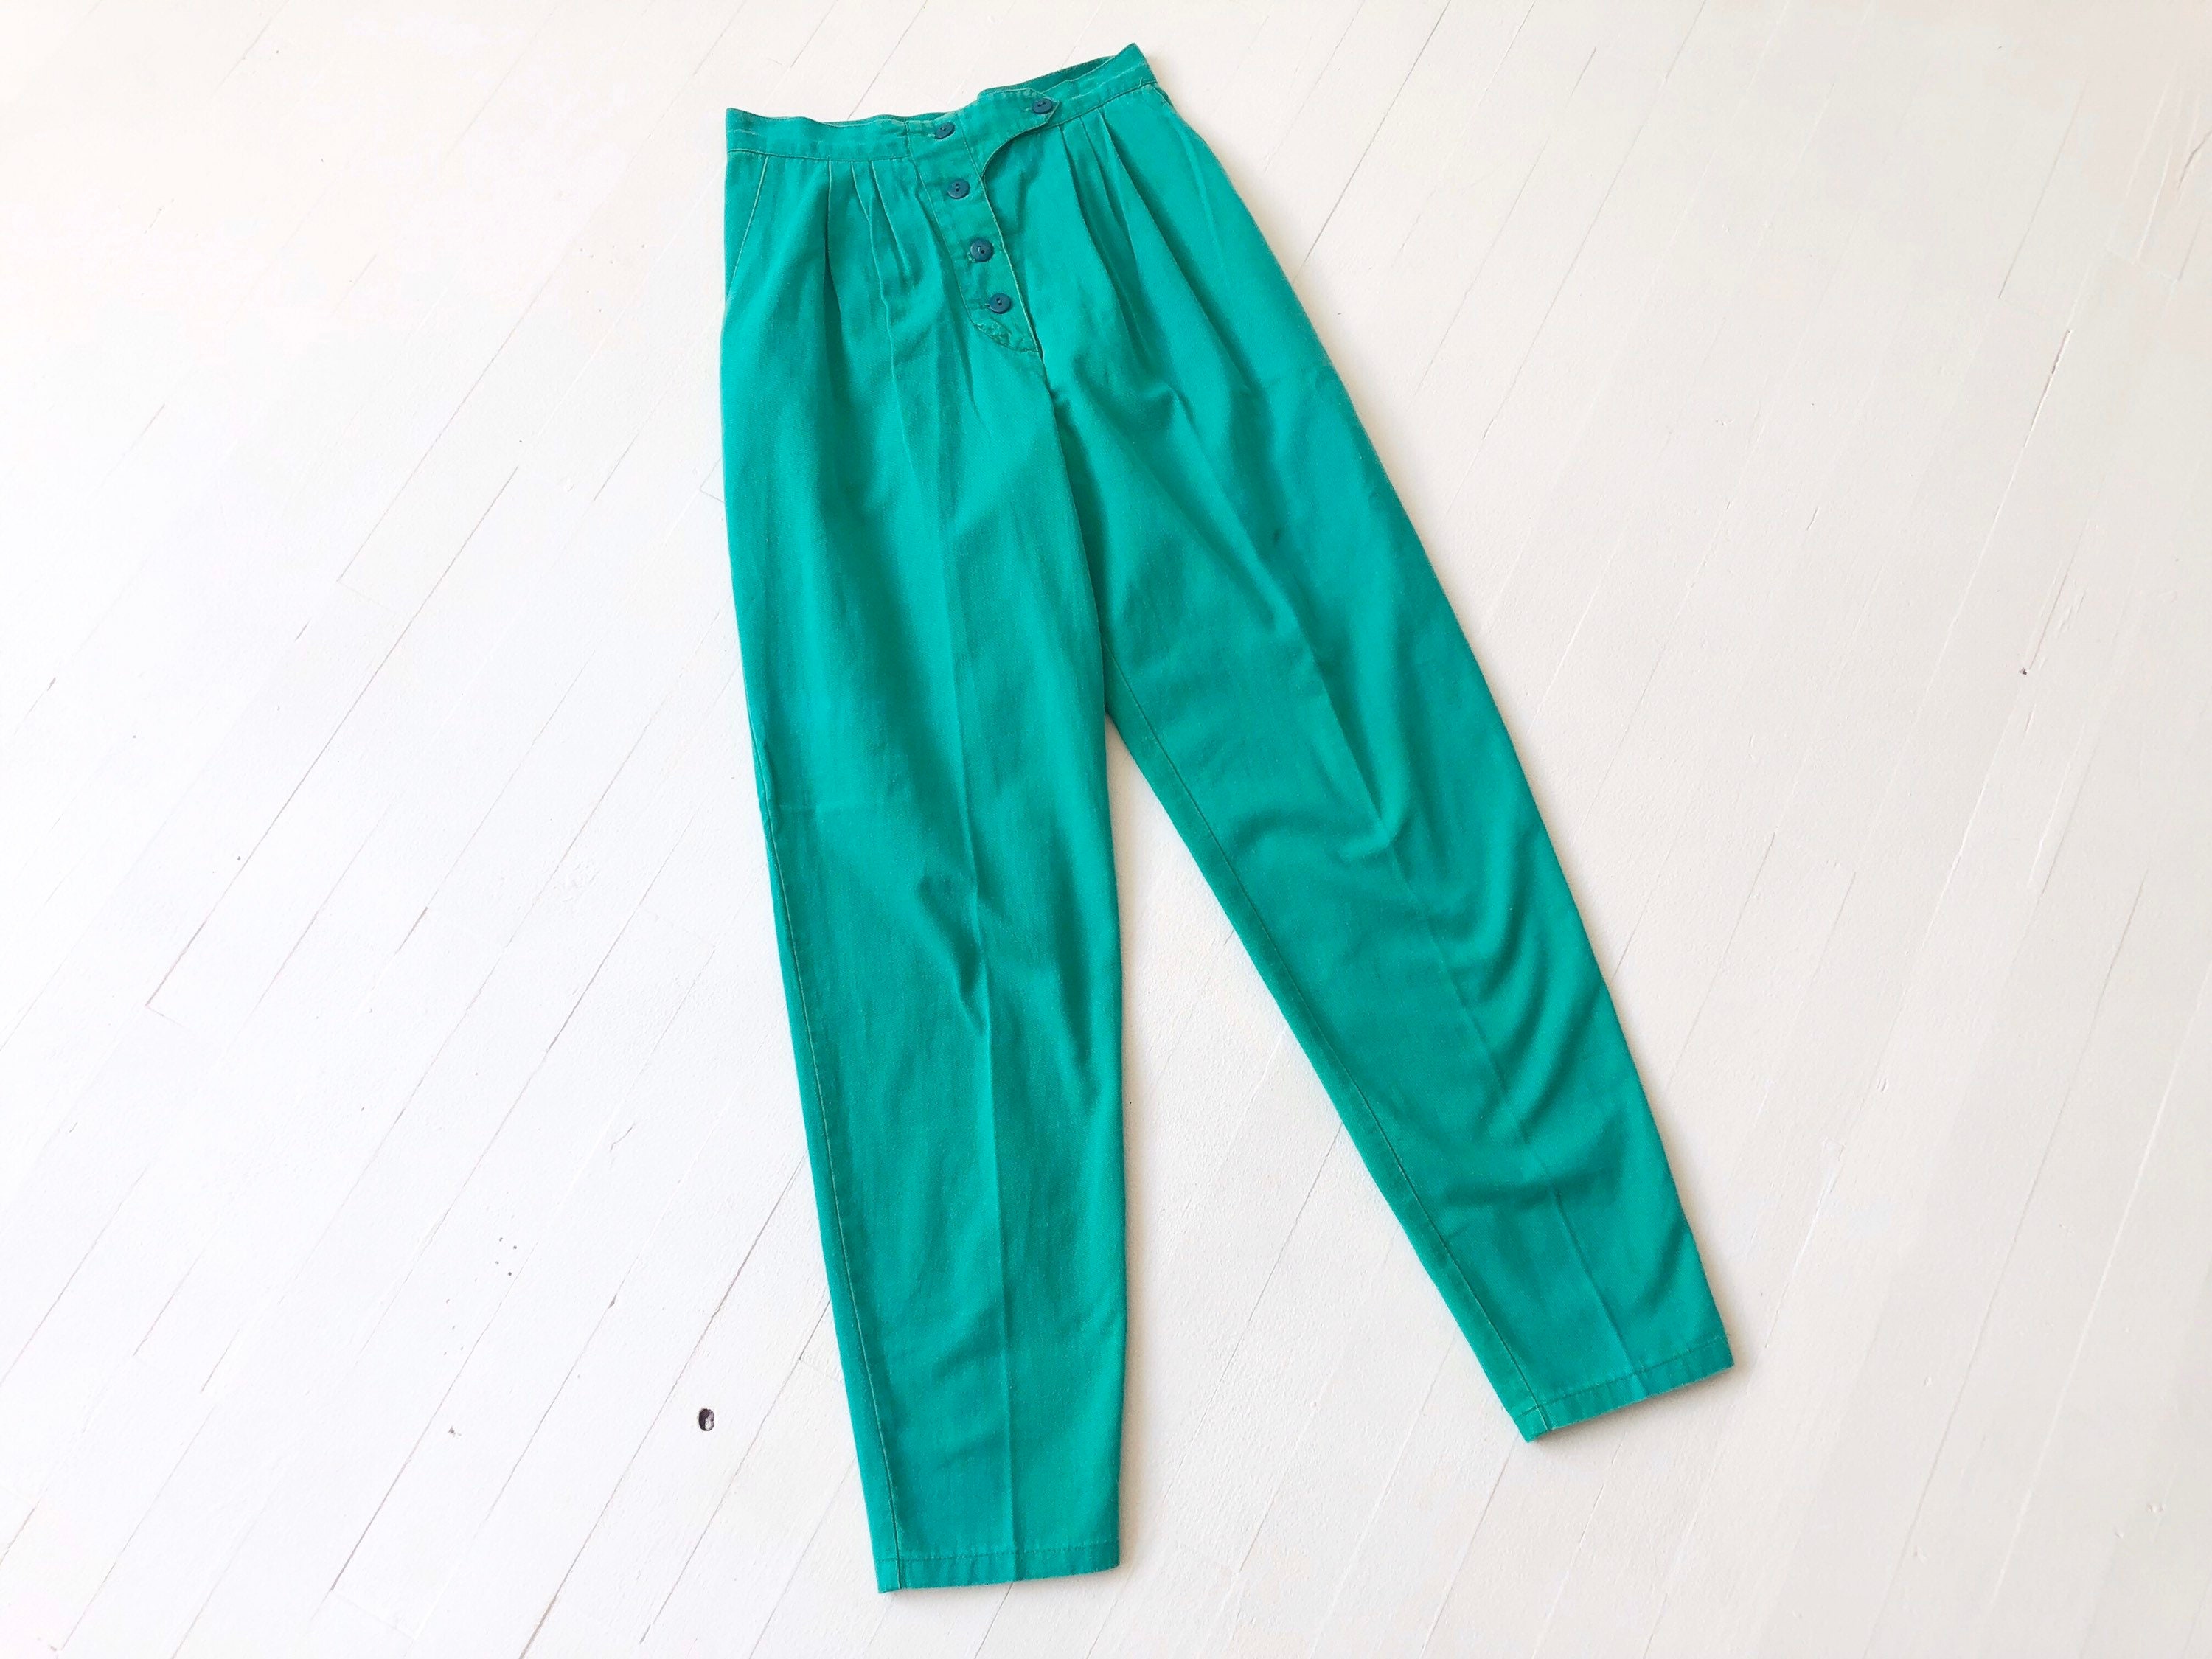 Vintage 80s Emerald Green Cotton High Waisted Pants -  Canada